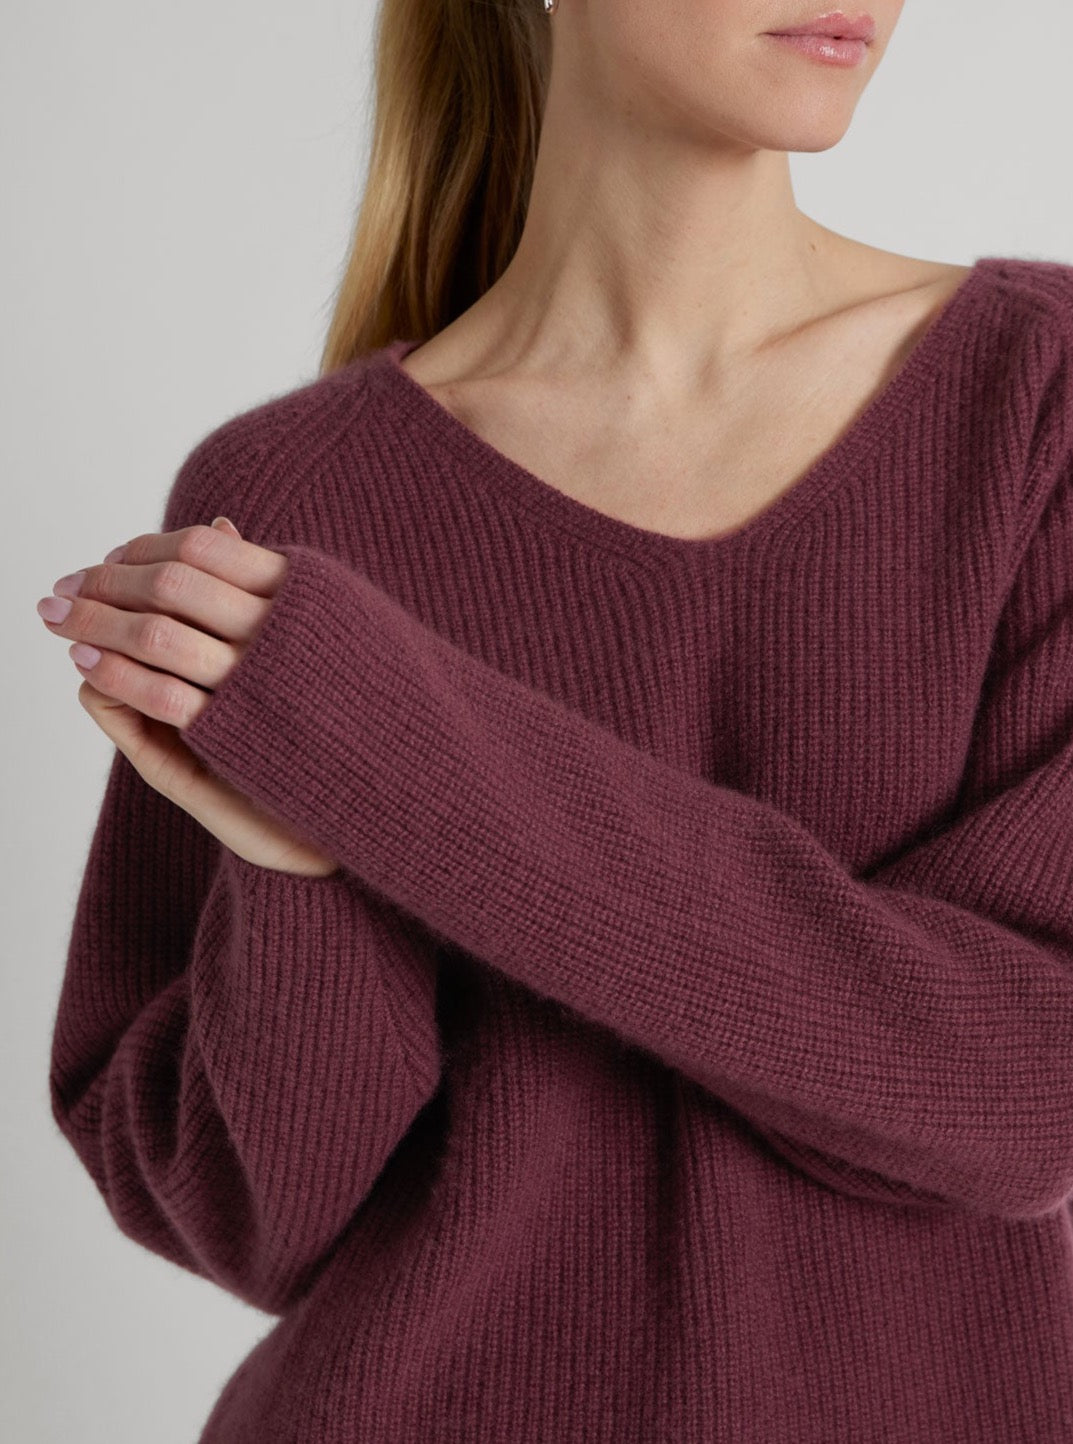 Rib knitted V-neck cashmere sweater in color: Cold Creme. 100% cashmere, Scandinavian design by Kashmina.